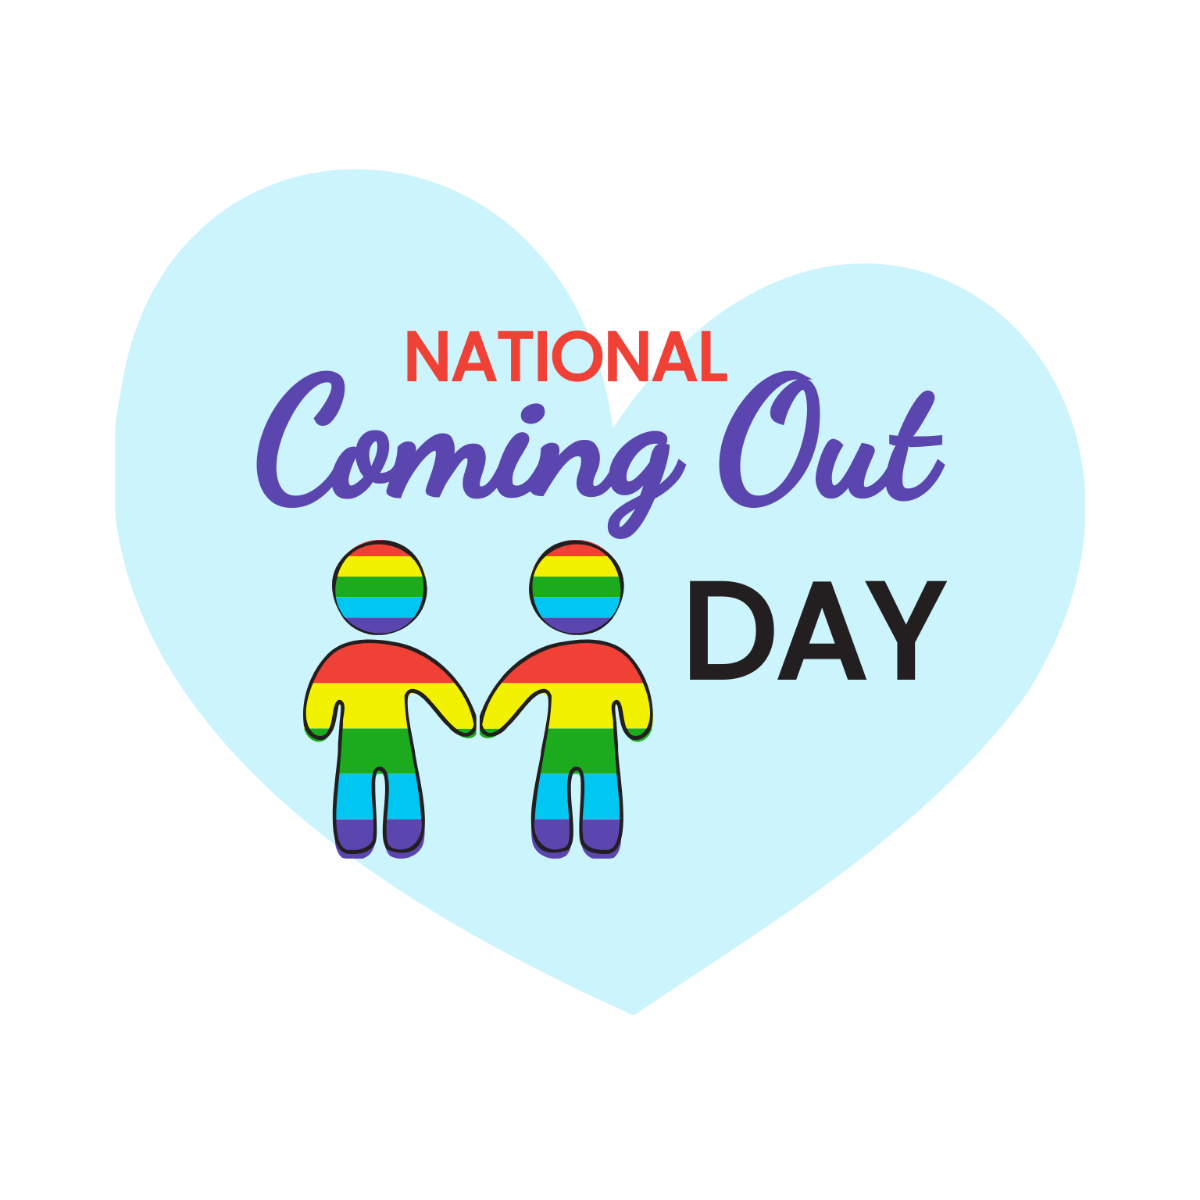 National Coming Out Day Cartoon Vector Template